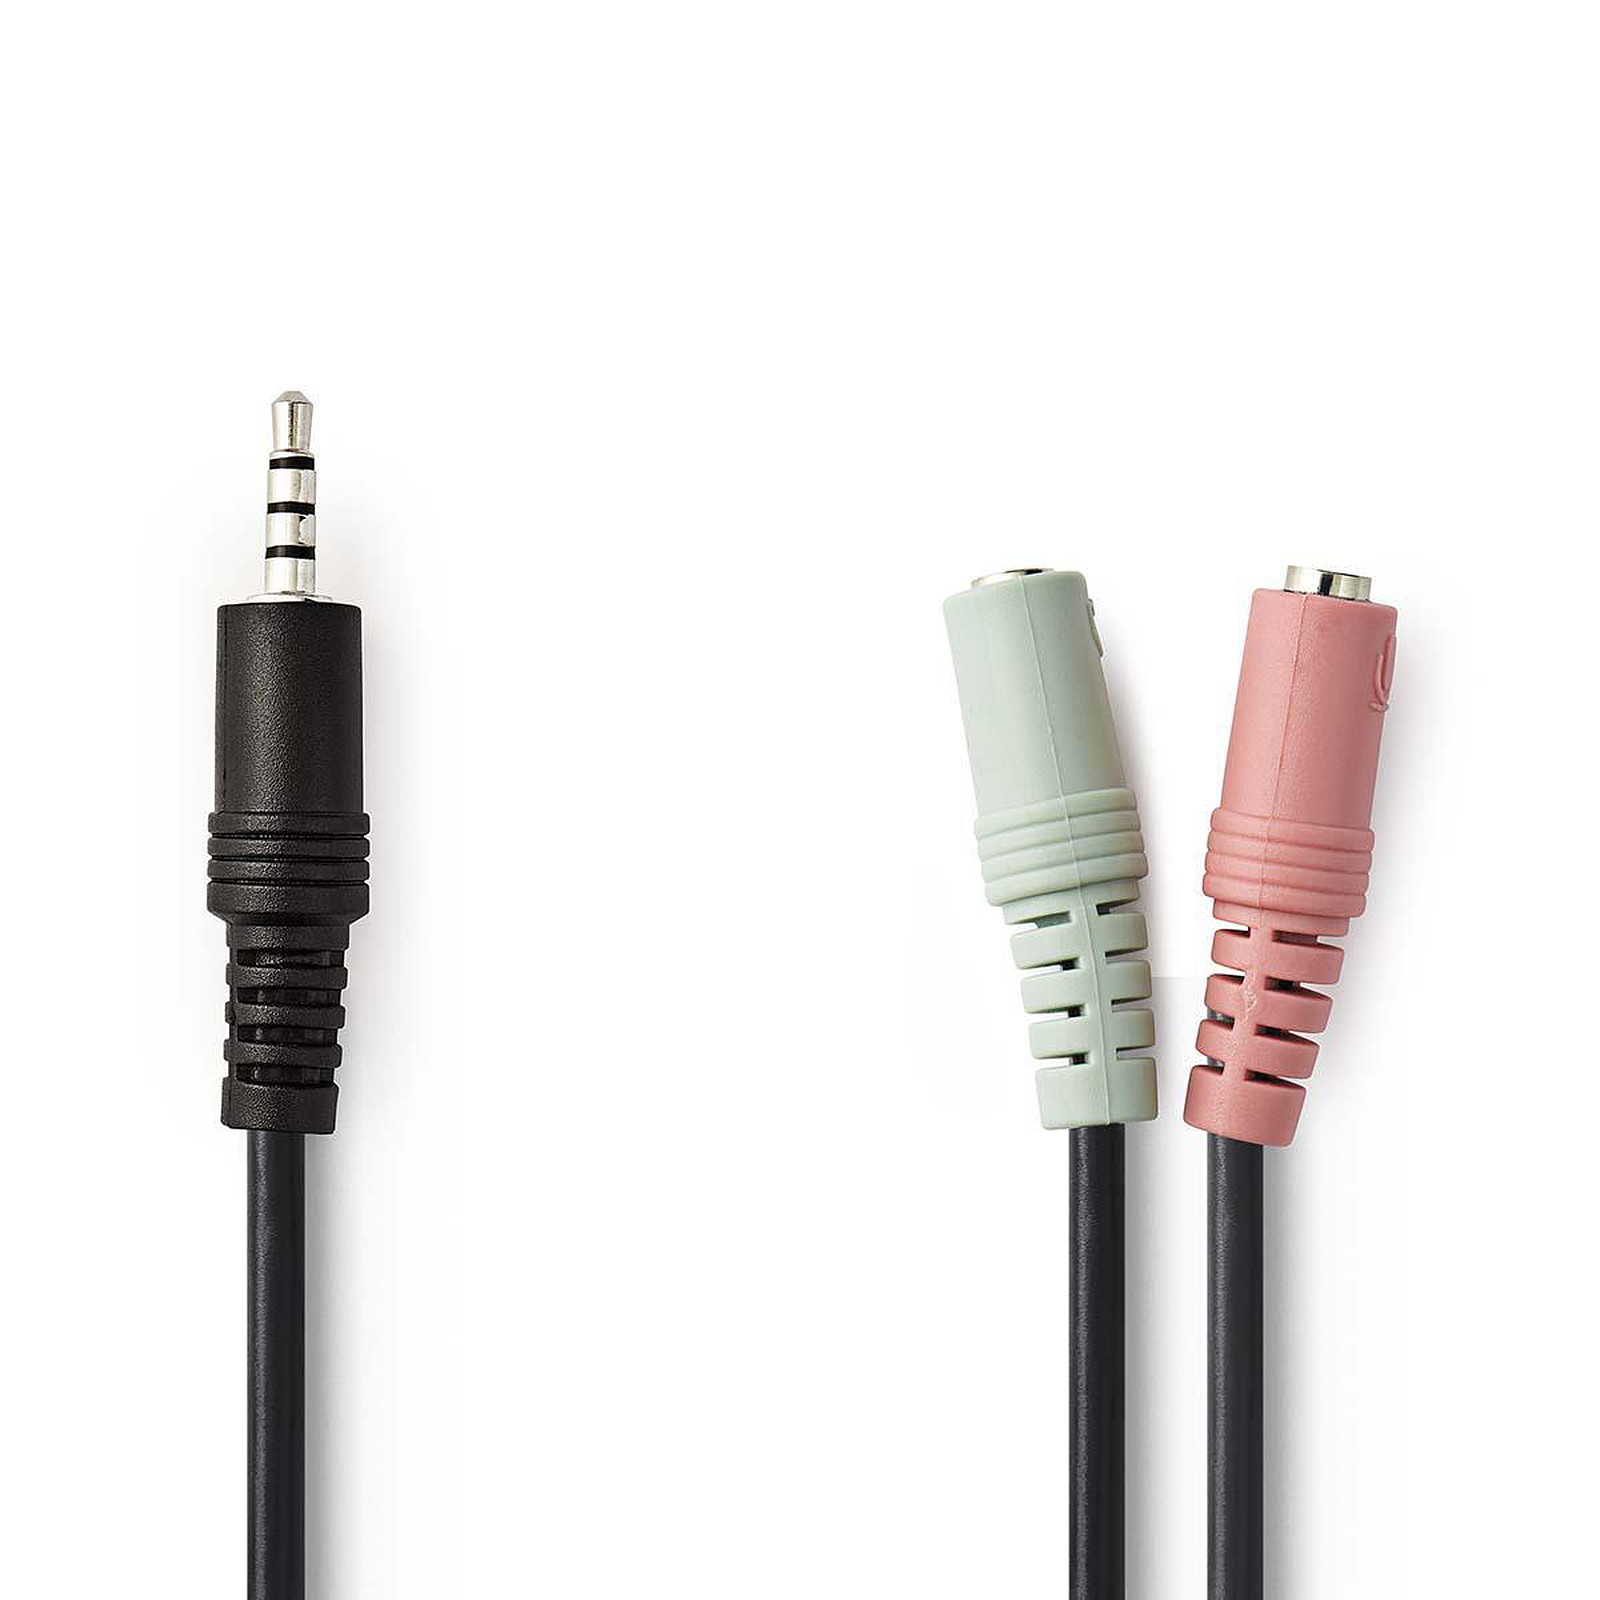 Nedis Cable Audio Stereo 1x Jack male 3.5 mm vers 2x Jack femelle 3.5 mm - Cable audio Jack NEDIS